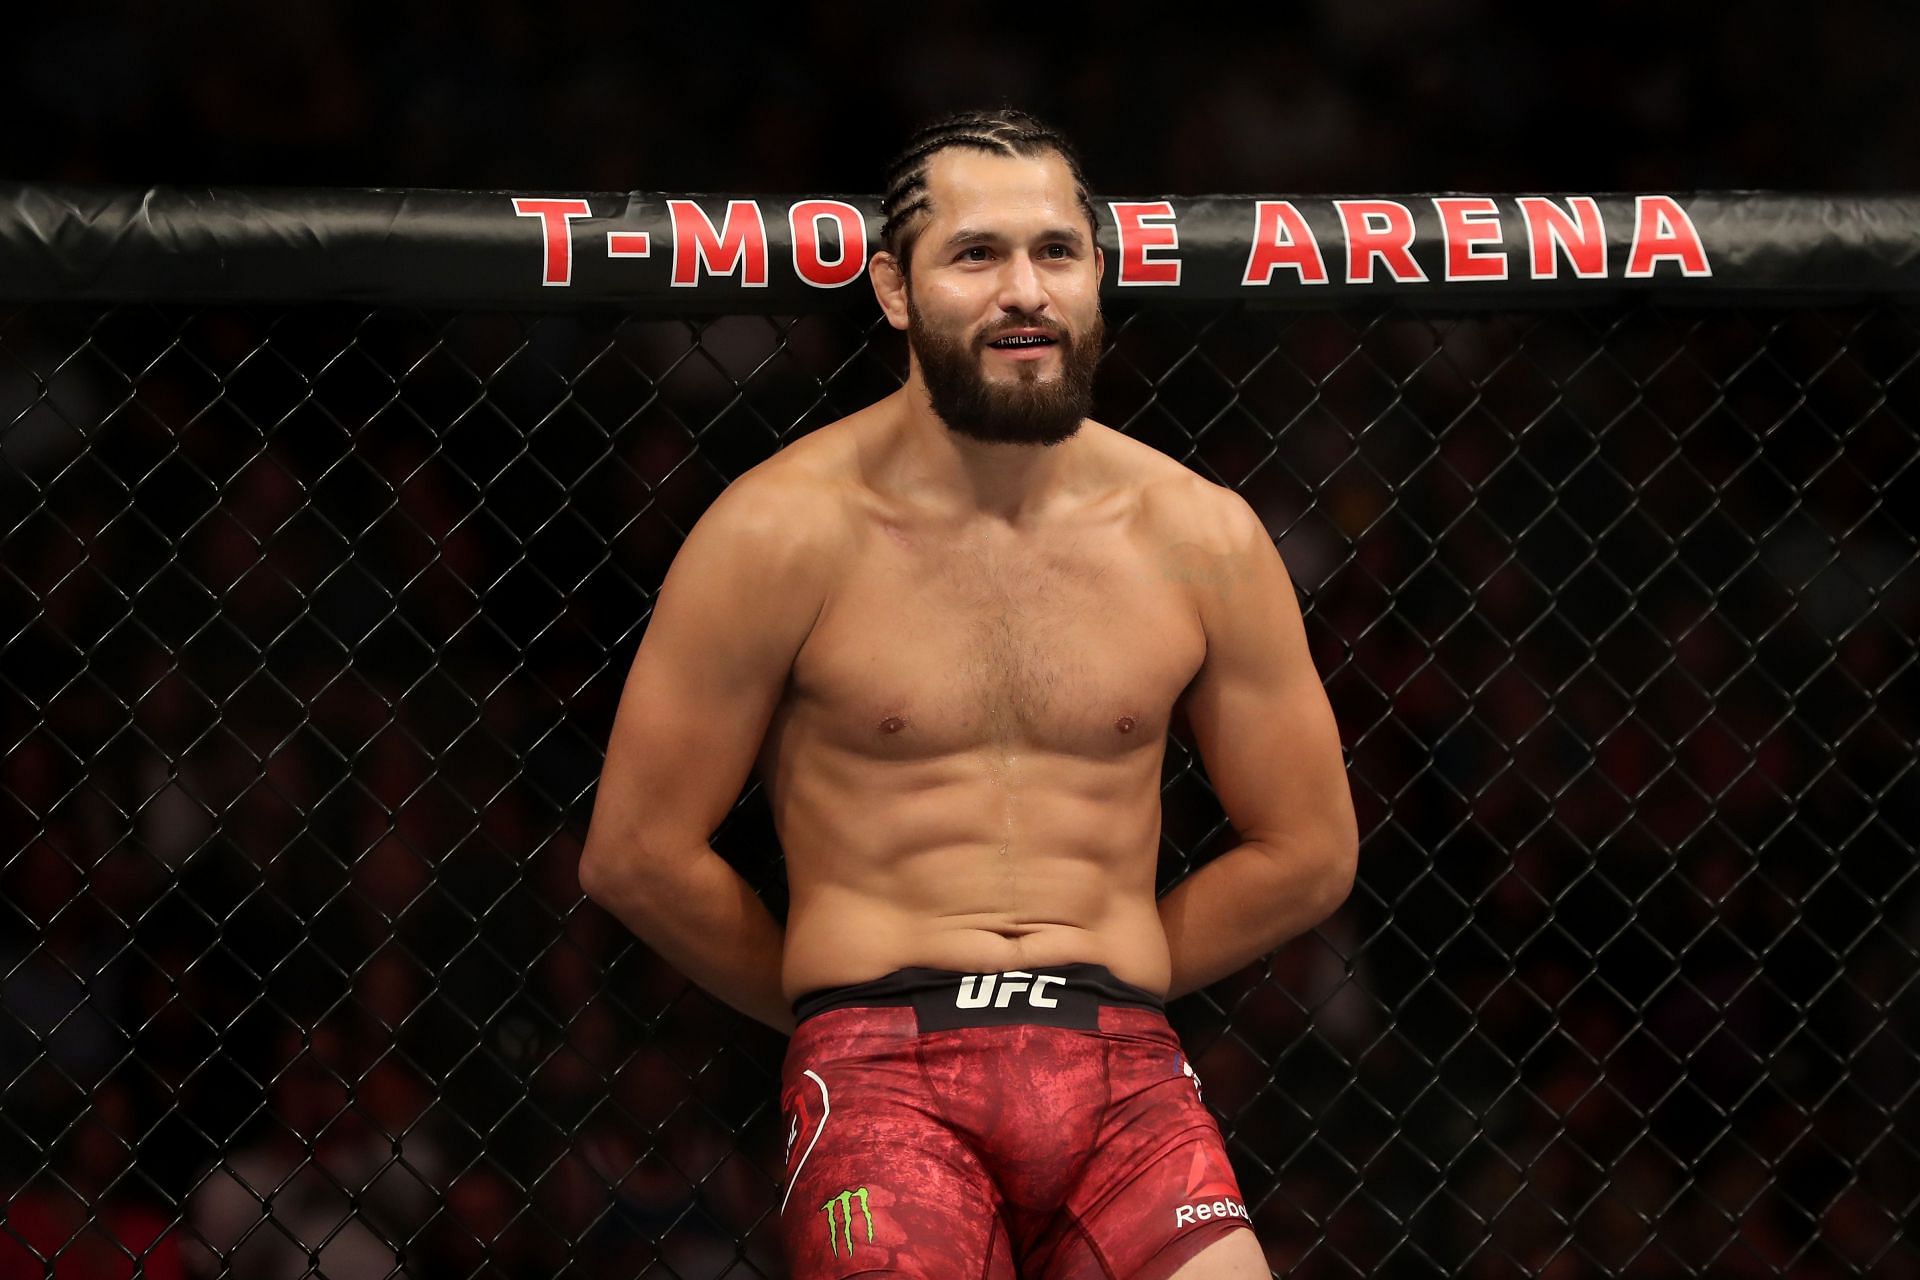 Can Jorge Masvidal find a way to overcome the pressuring style of Colby Covington this weekend?